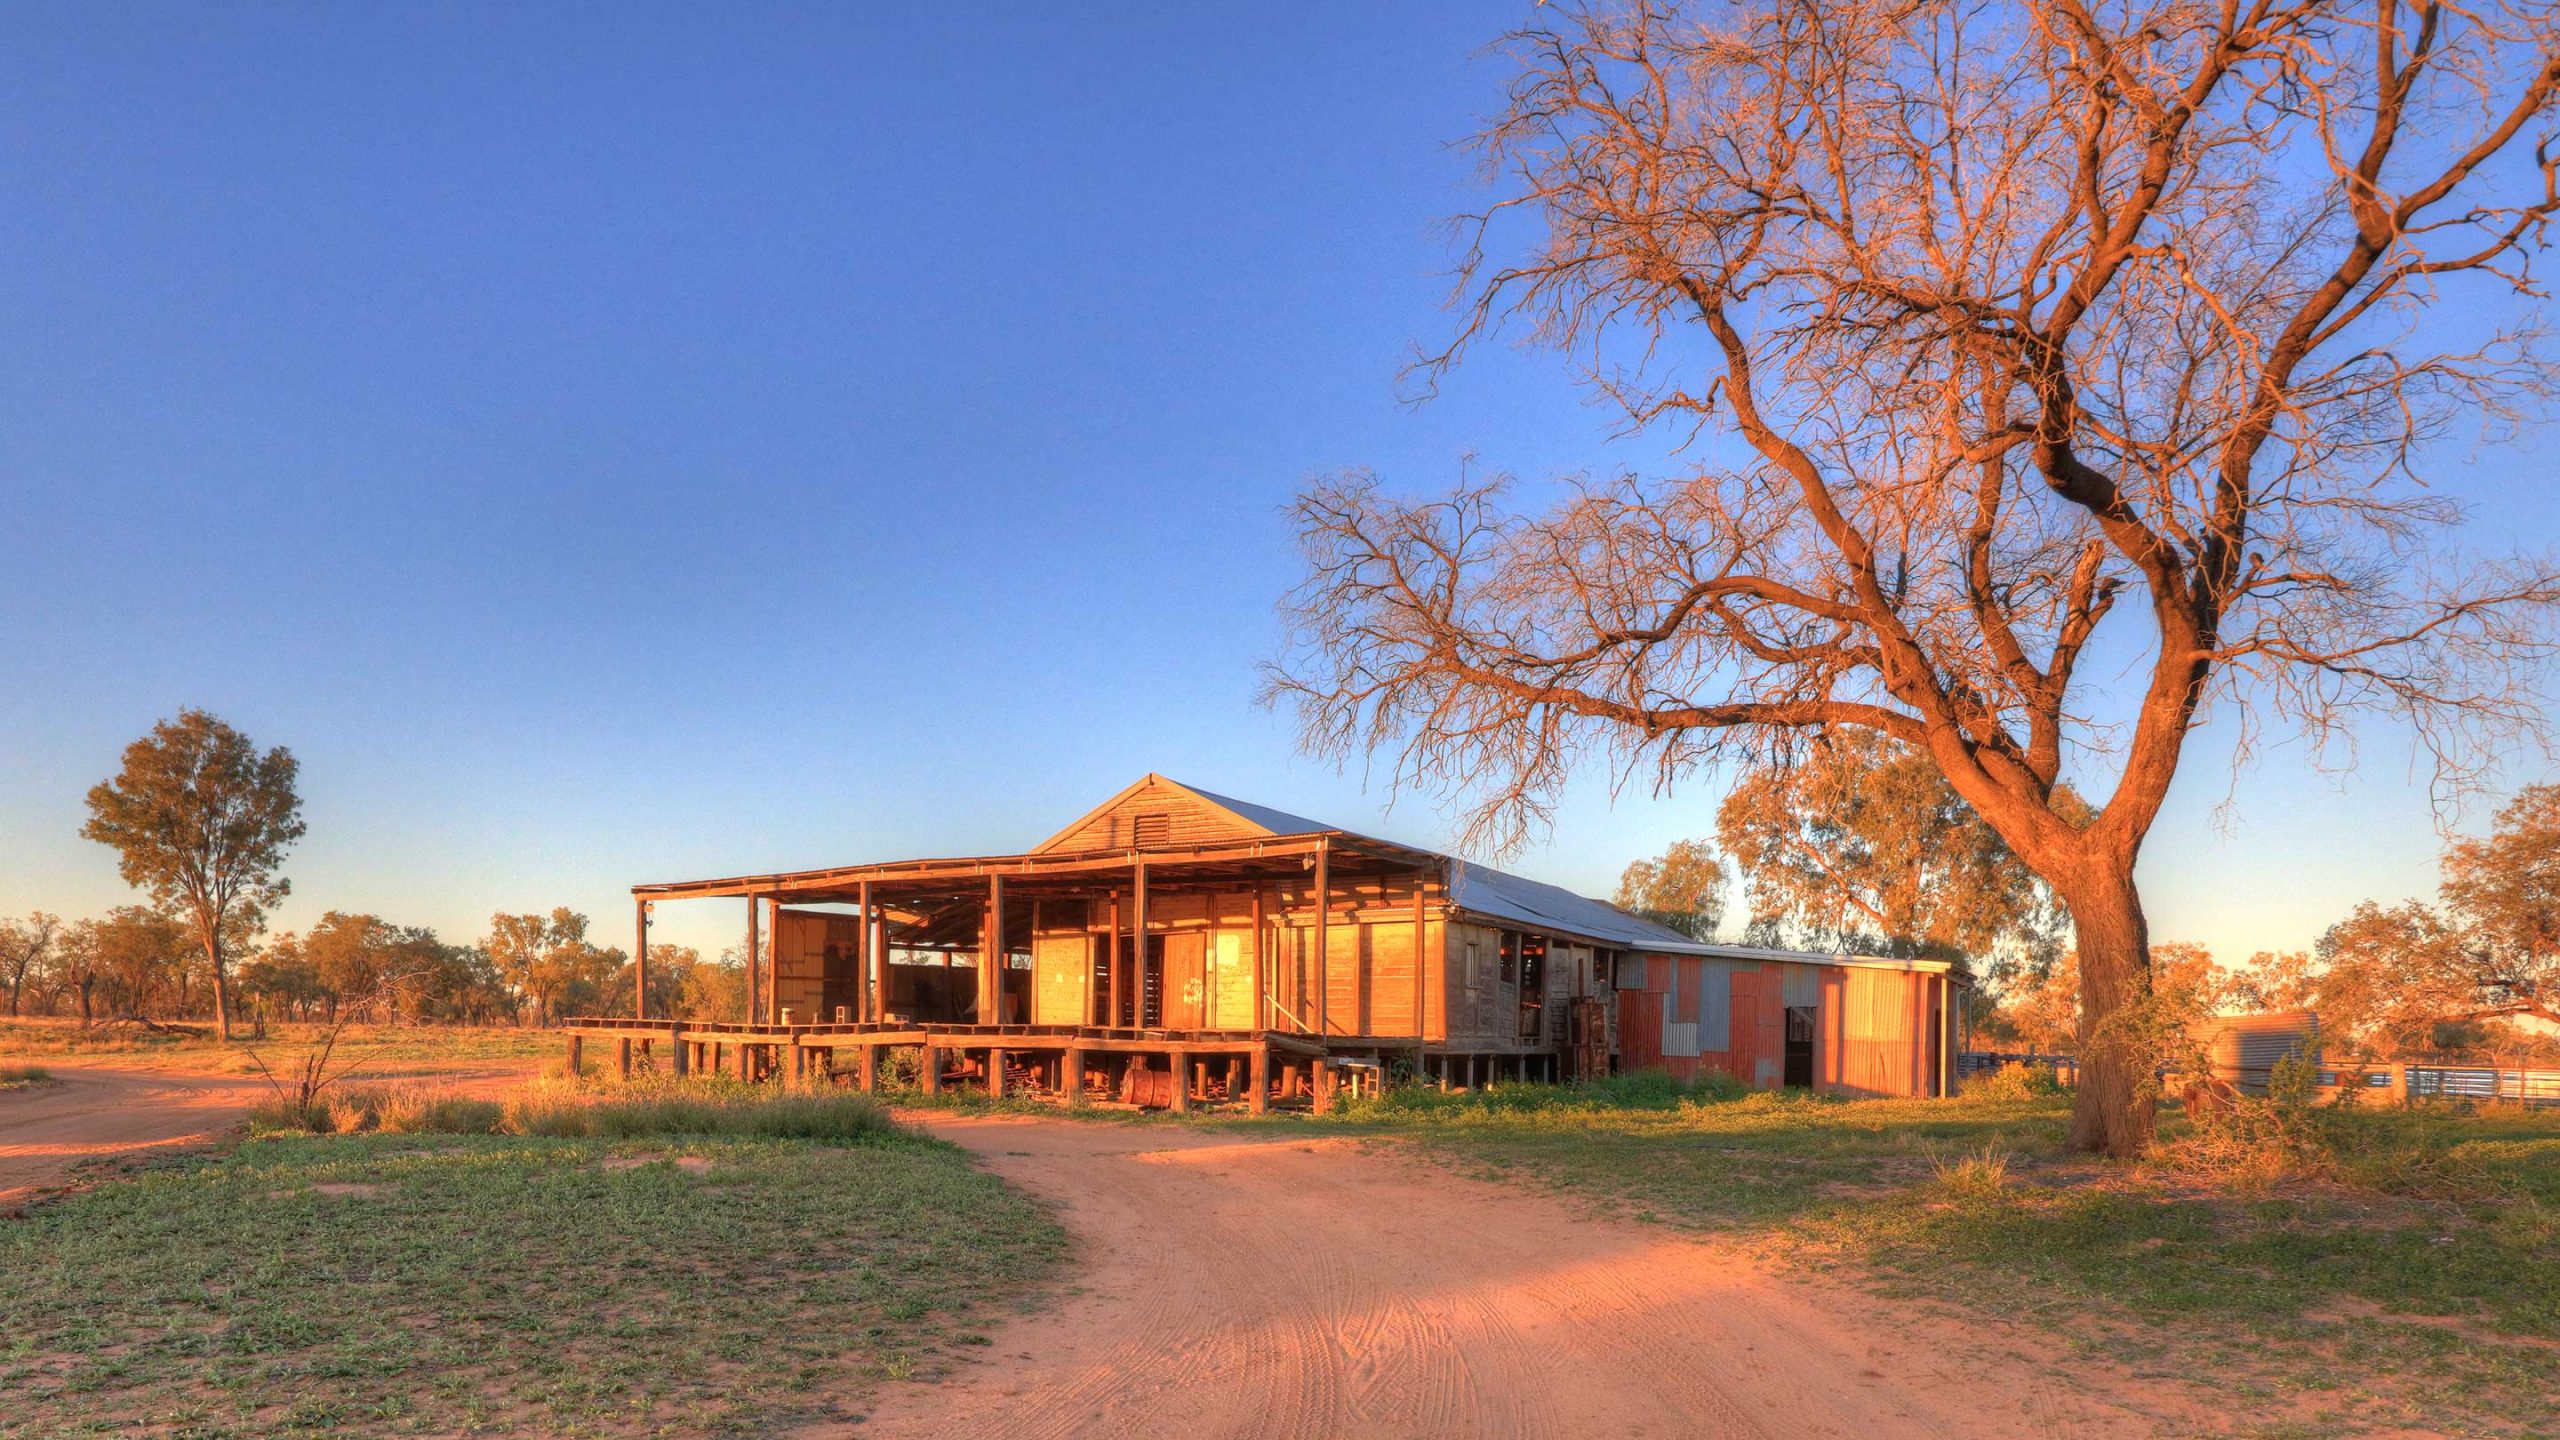 shearing shed conversion to farm-stay accommodation the